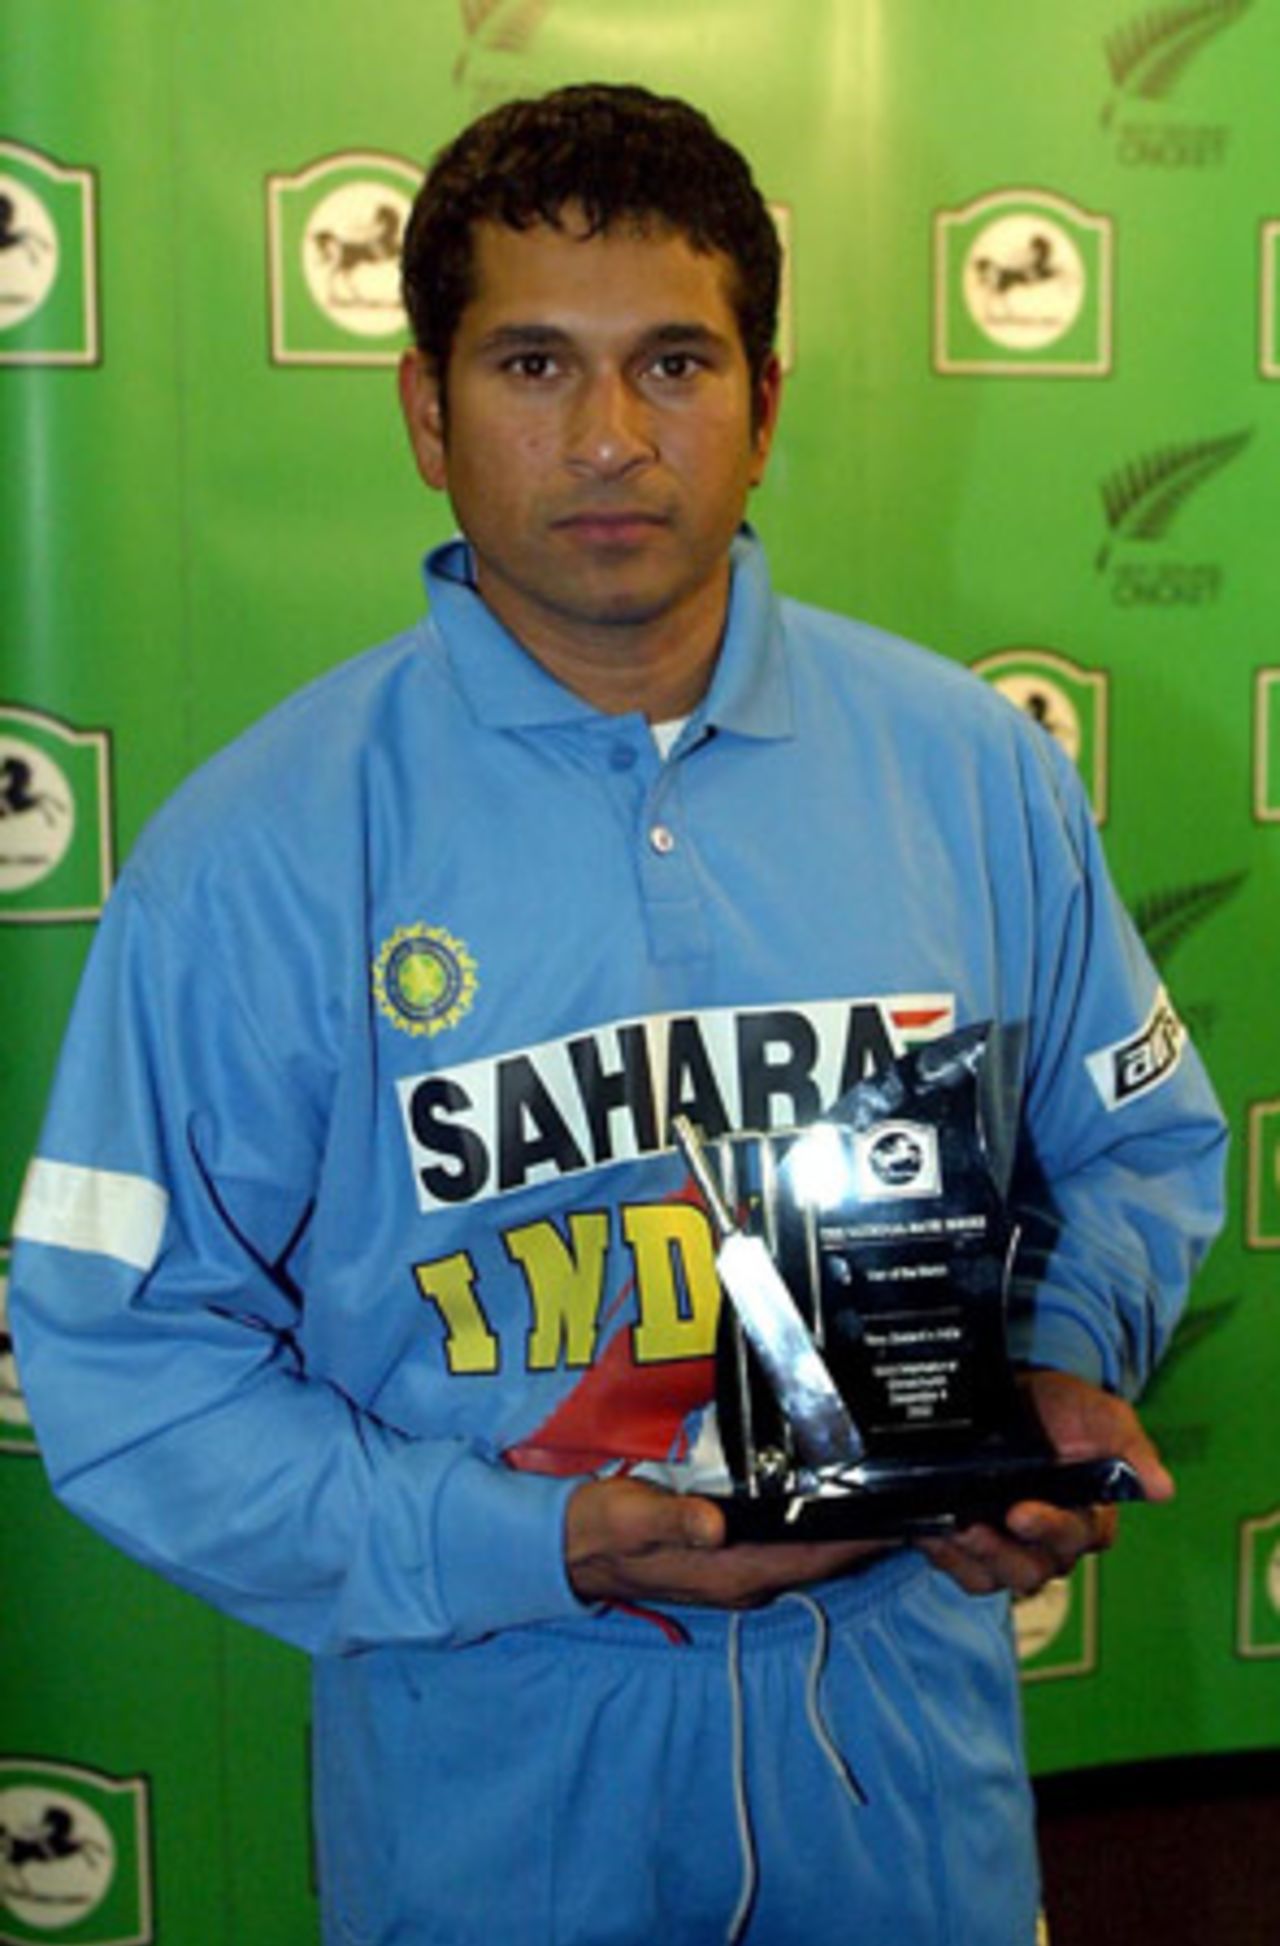 Indian player Sachin Tendulkar with his man of the match award for his performance of innings of 72 and five, and bowling figures of 5-55 from four overs. Super Max International: New Zealand v India at Jade Stadium, Christchurch, 4 December 2002.